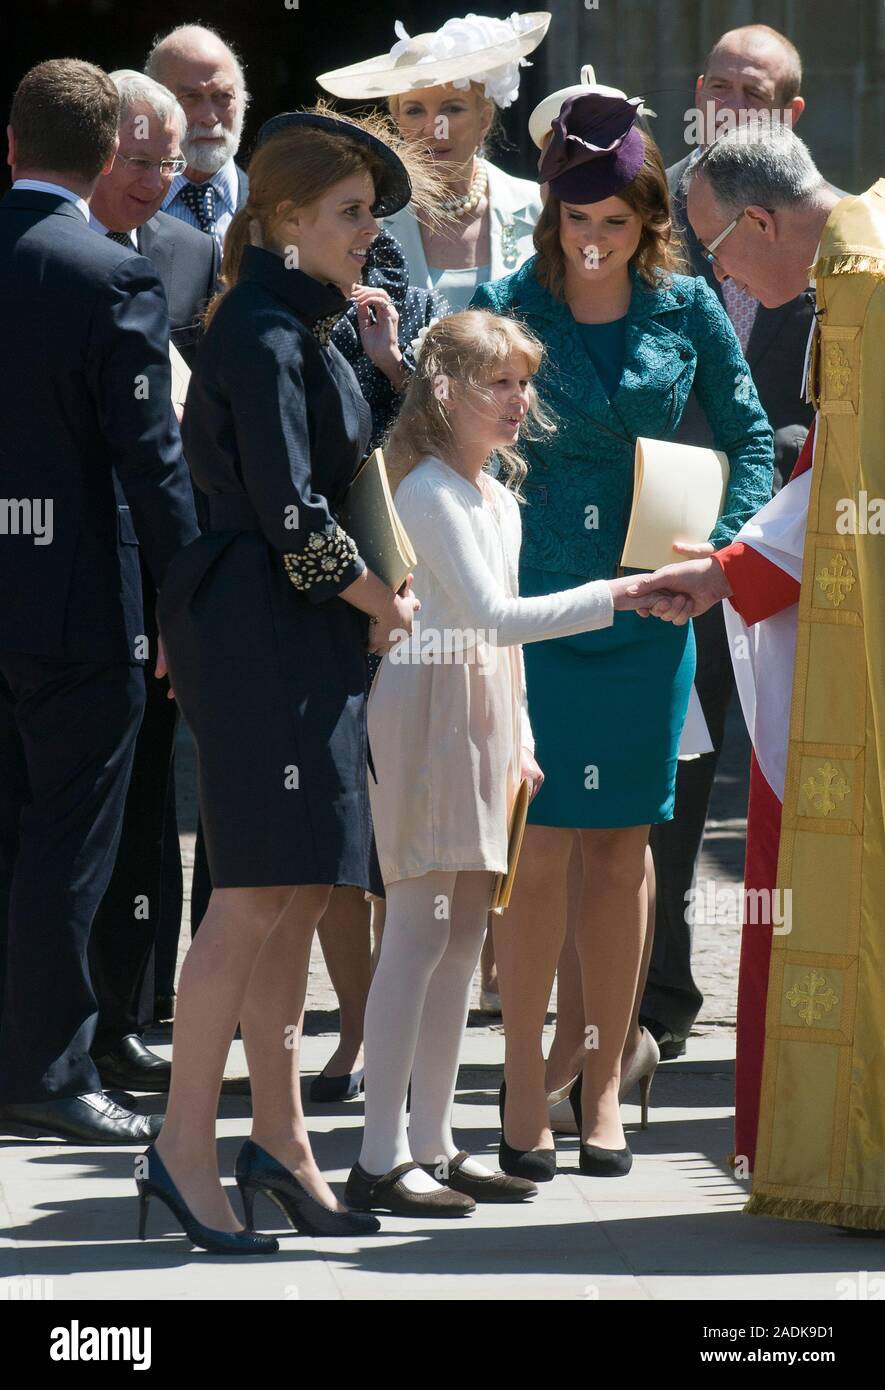 Princess Eugenie and Beatrice with Lady Louise Windsor join  The Queen  at Westminster Abbey for a ceremony to mark the 60th anniversary of her coronation in 1953. Accompanied by the Duke of Edinburgh, Prince Charles and the Duchess of Cornwall, the Duke and Duchess of Cambridge, and other members of the Royal Family June 2013. Stock Photo